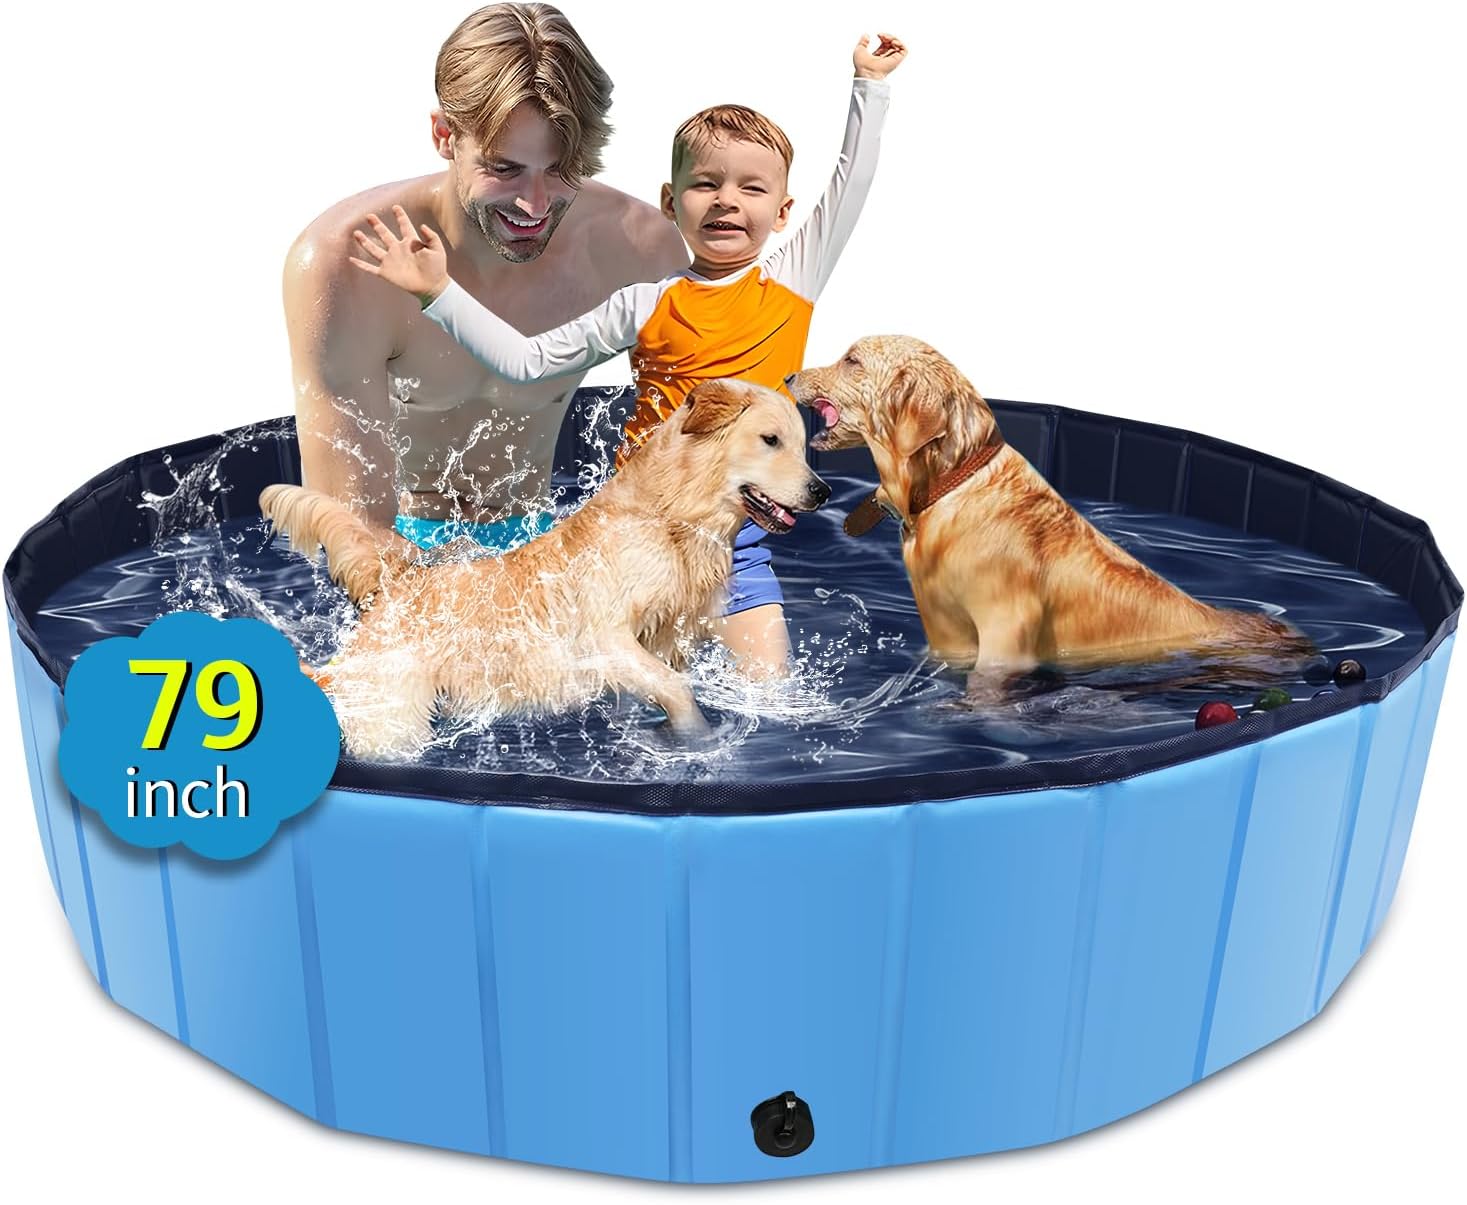 Foldable Dog Pool - 79"x14" Non-Slip, Hard Plastic, Collapsible Swimming Pool for Kids & Pets